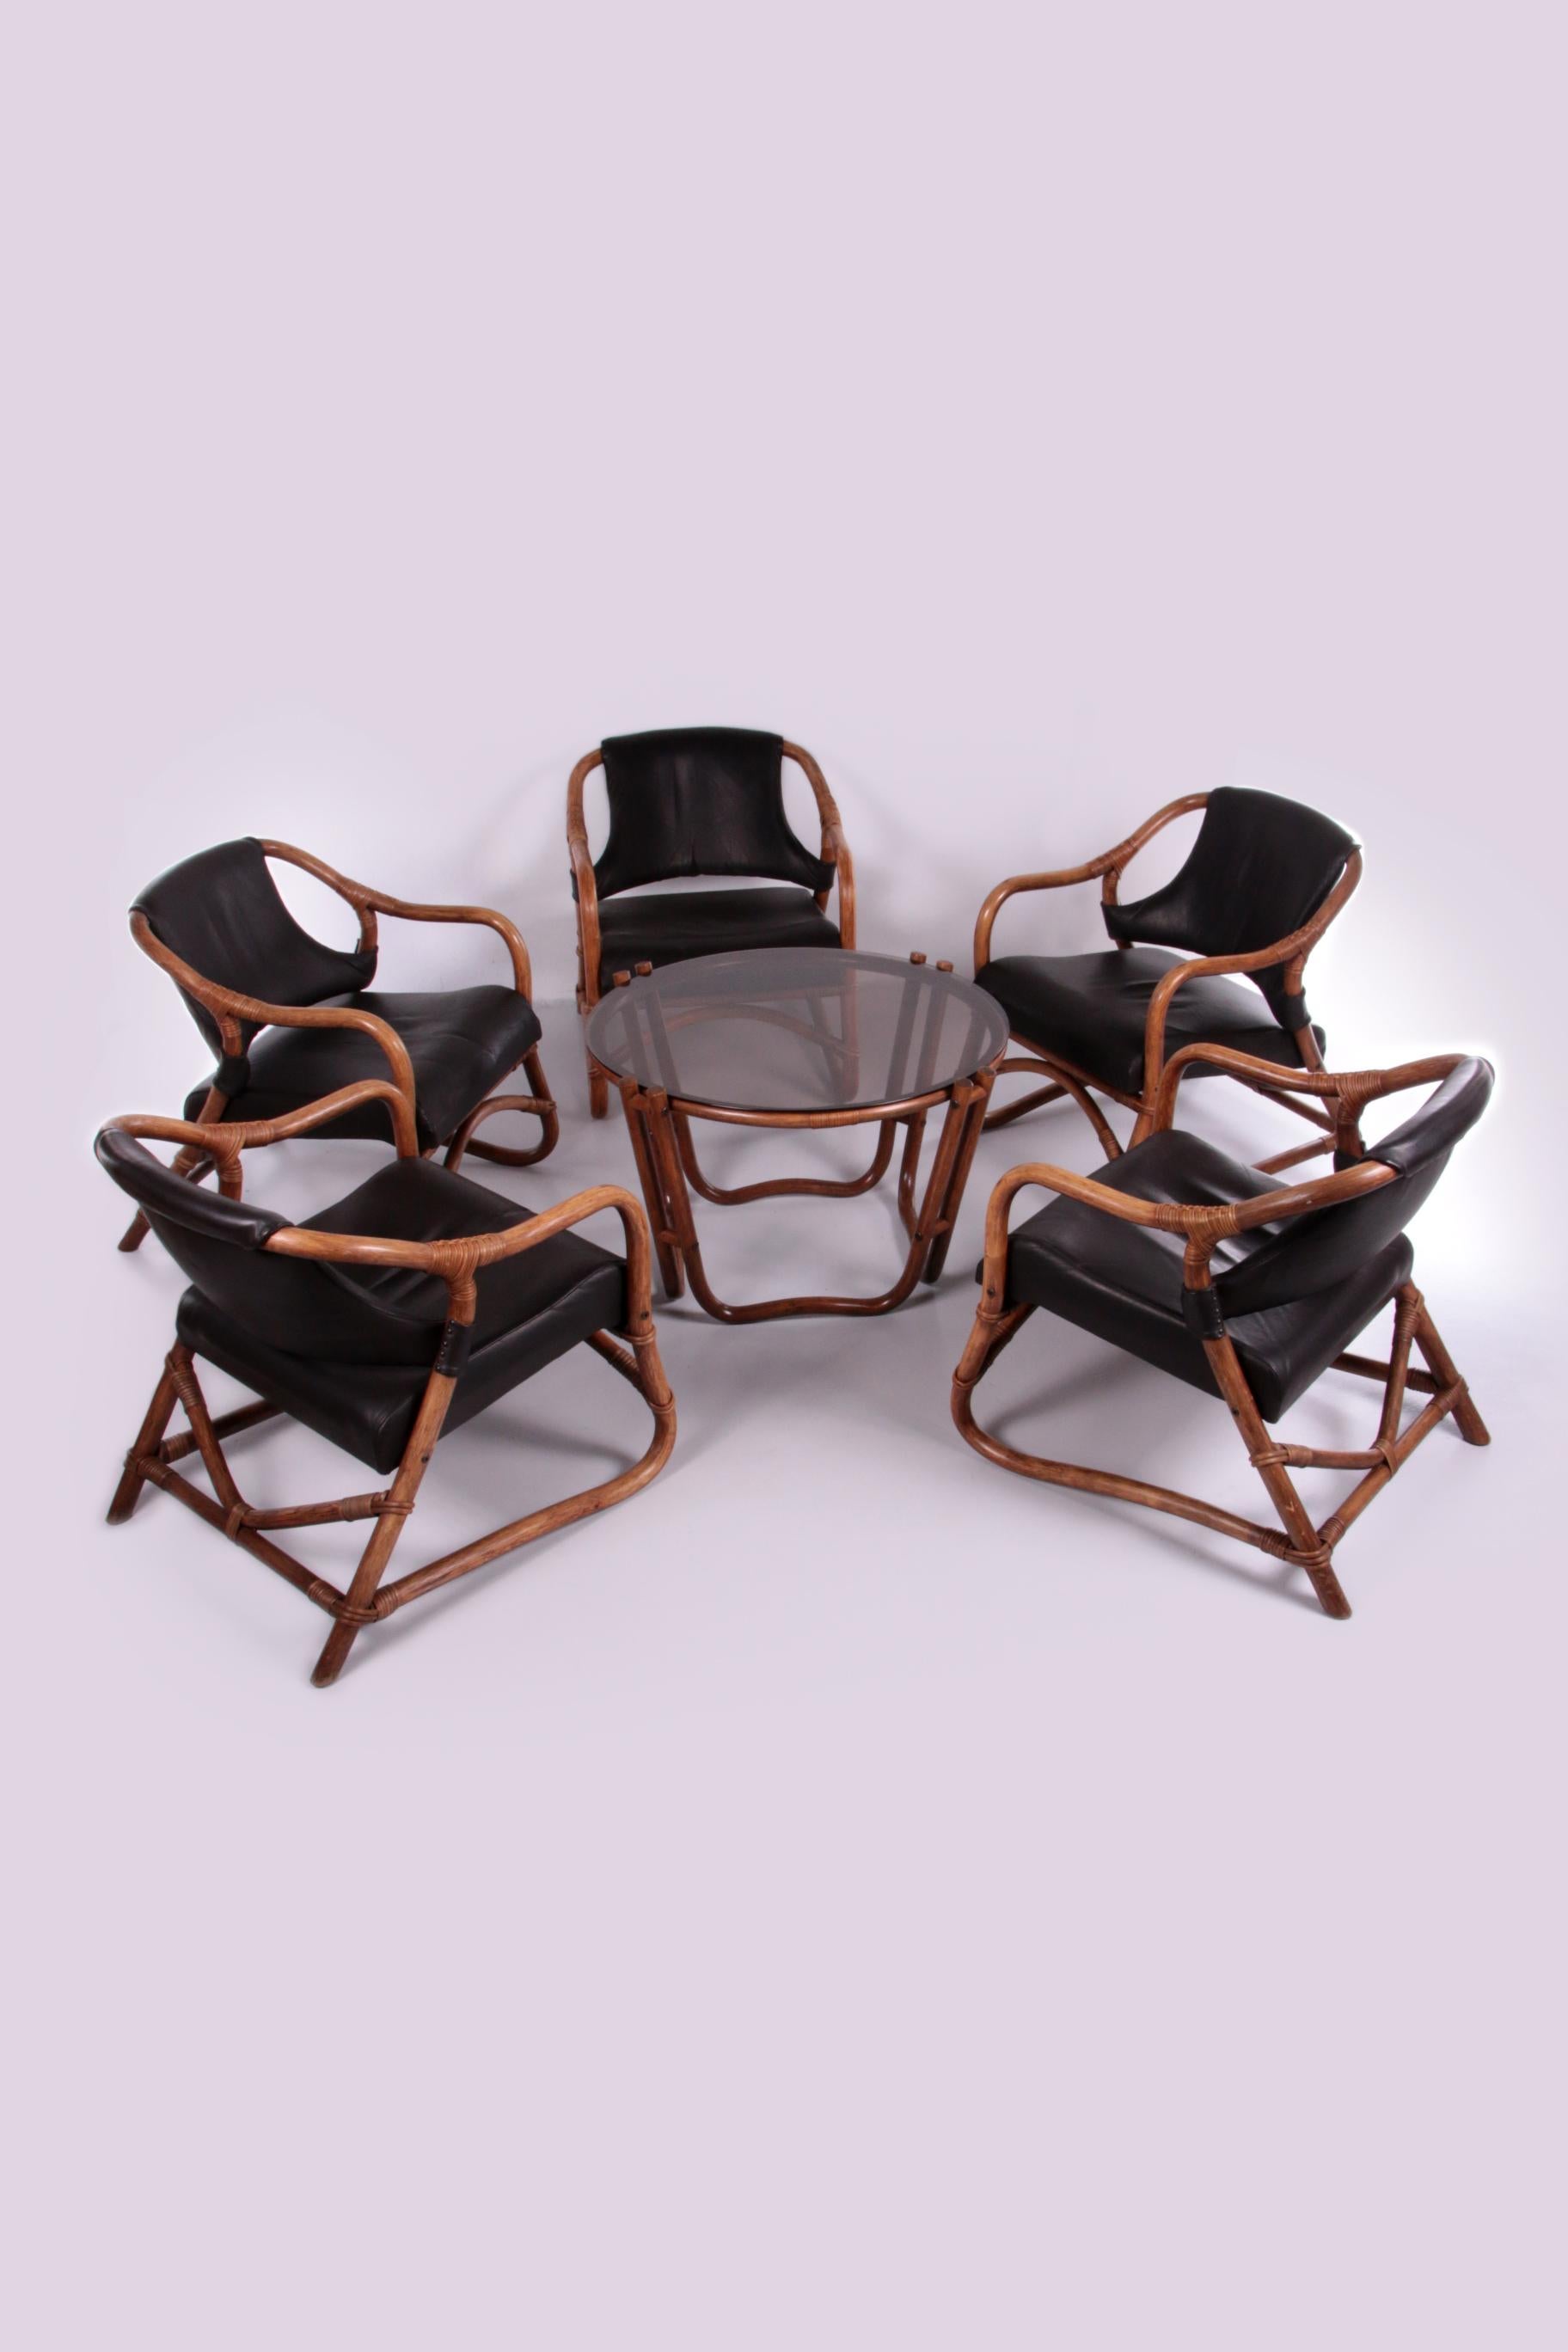 A beautiful and stylish bamboo lounge set consisting of five chairs and a matching table.

The bamboo produced in the frame of the chairs and the table has a beautiful deep brown patina. The table has a table top made of dark glass and the chairs